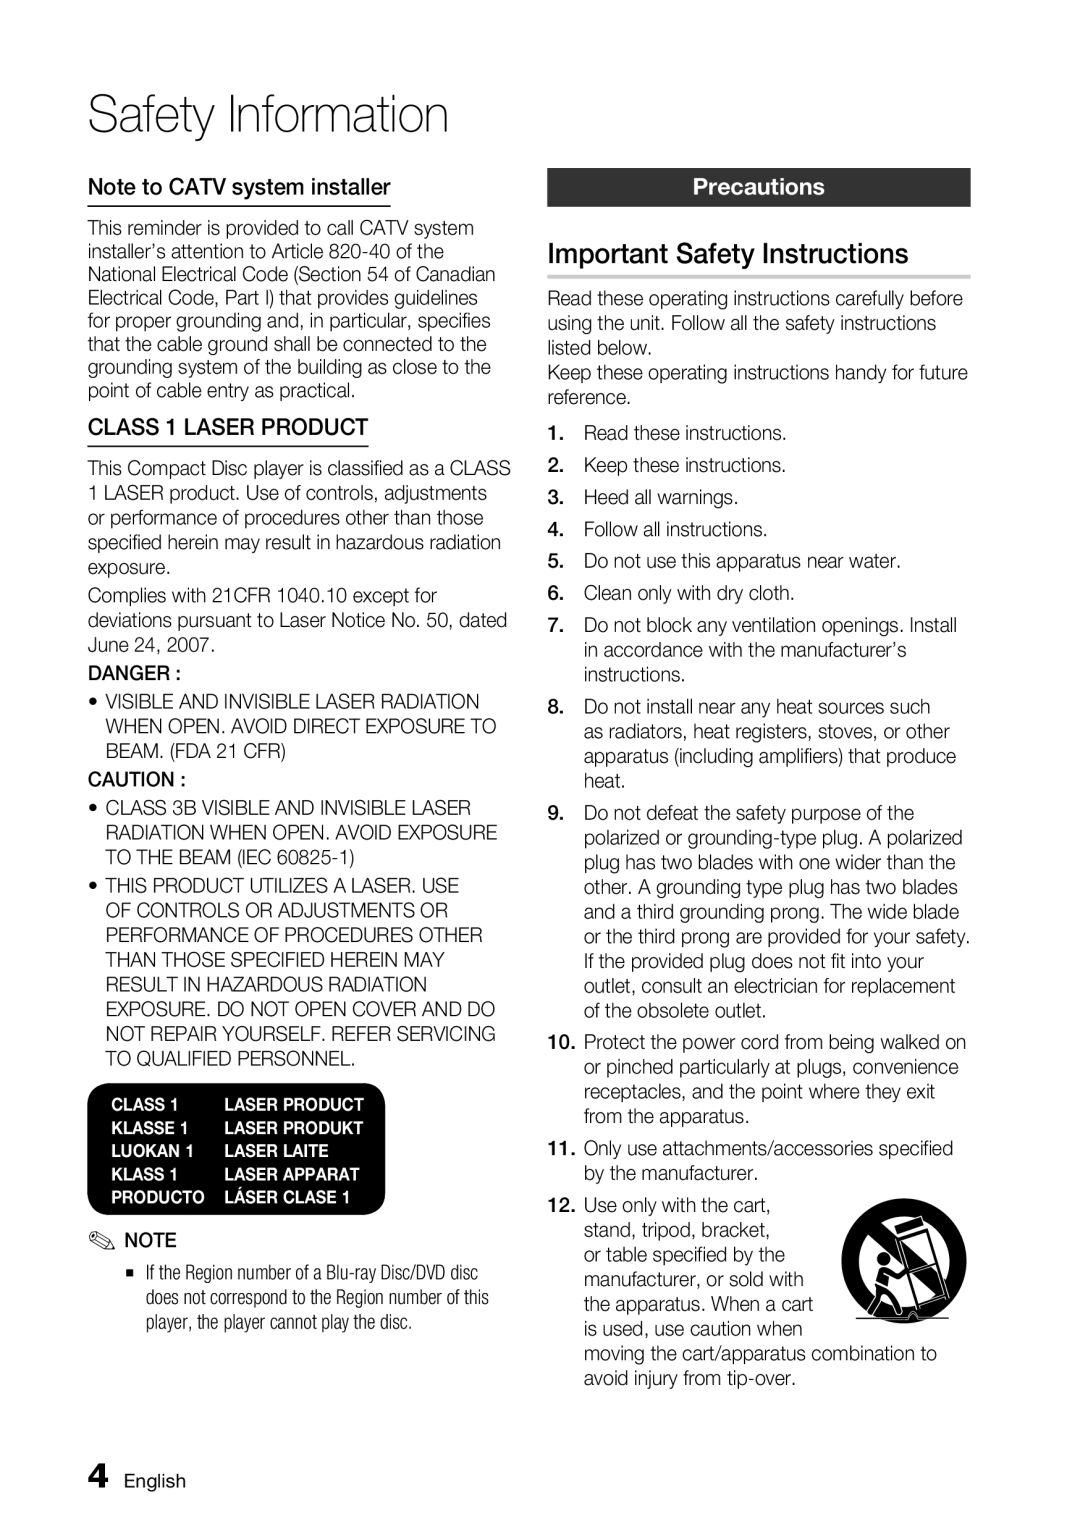 Samsung BD-C6500/EDC Important Safety Instructions, Note to CATV system installer, CLASS 1 LASER product, Precautions 